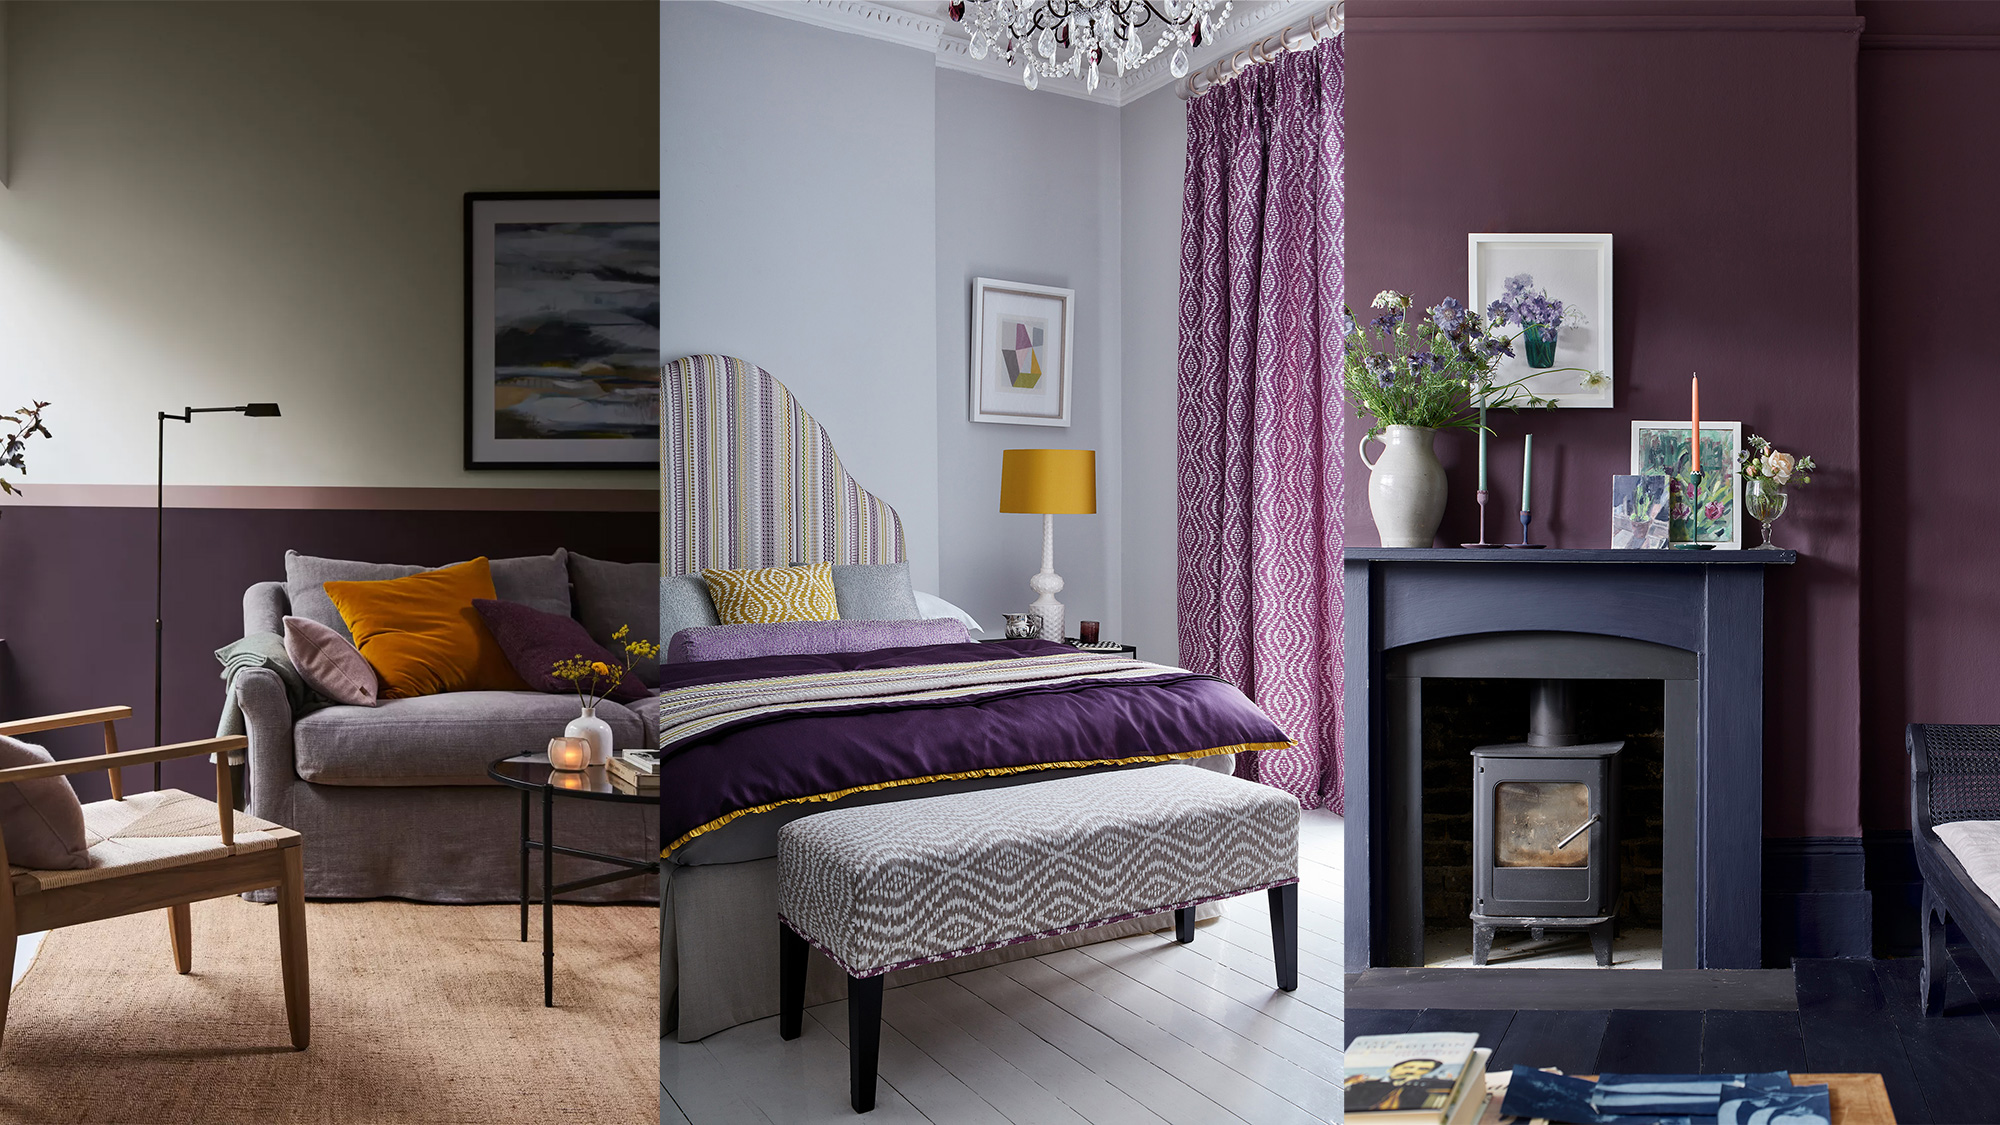 Decorating With Purple 10 Ways To Use